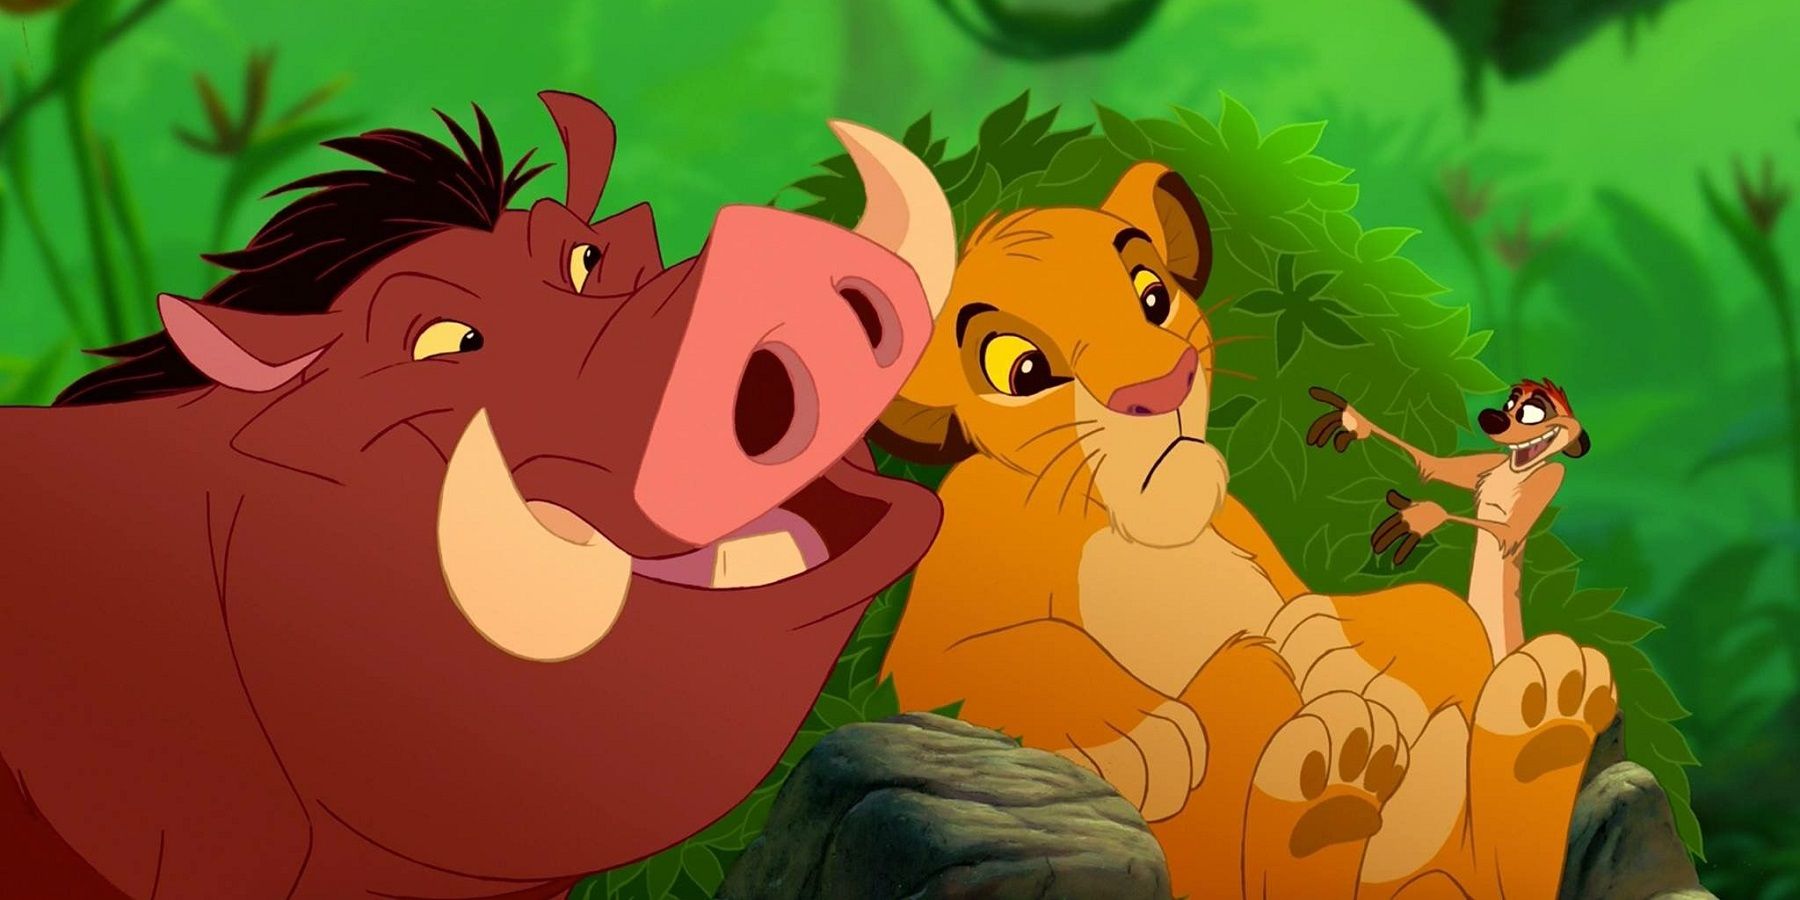 Timon and Pumbaa with Simba in The Lion King